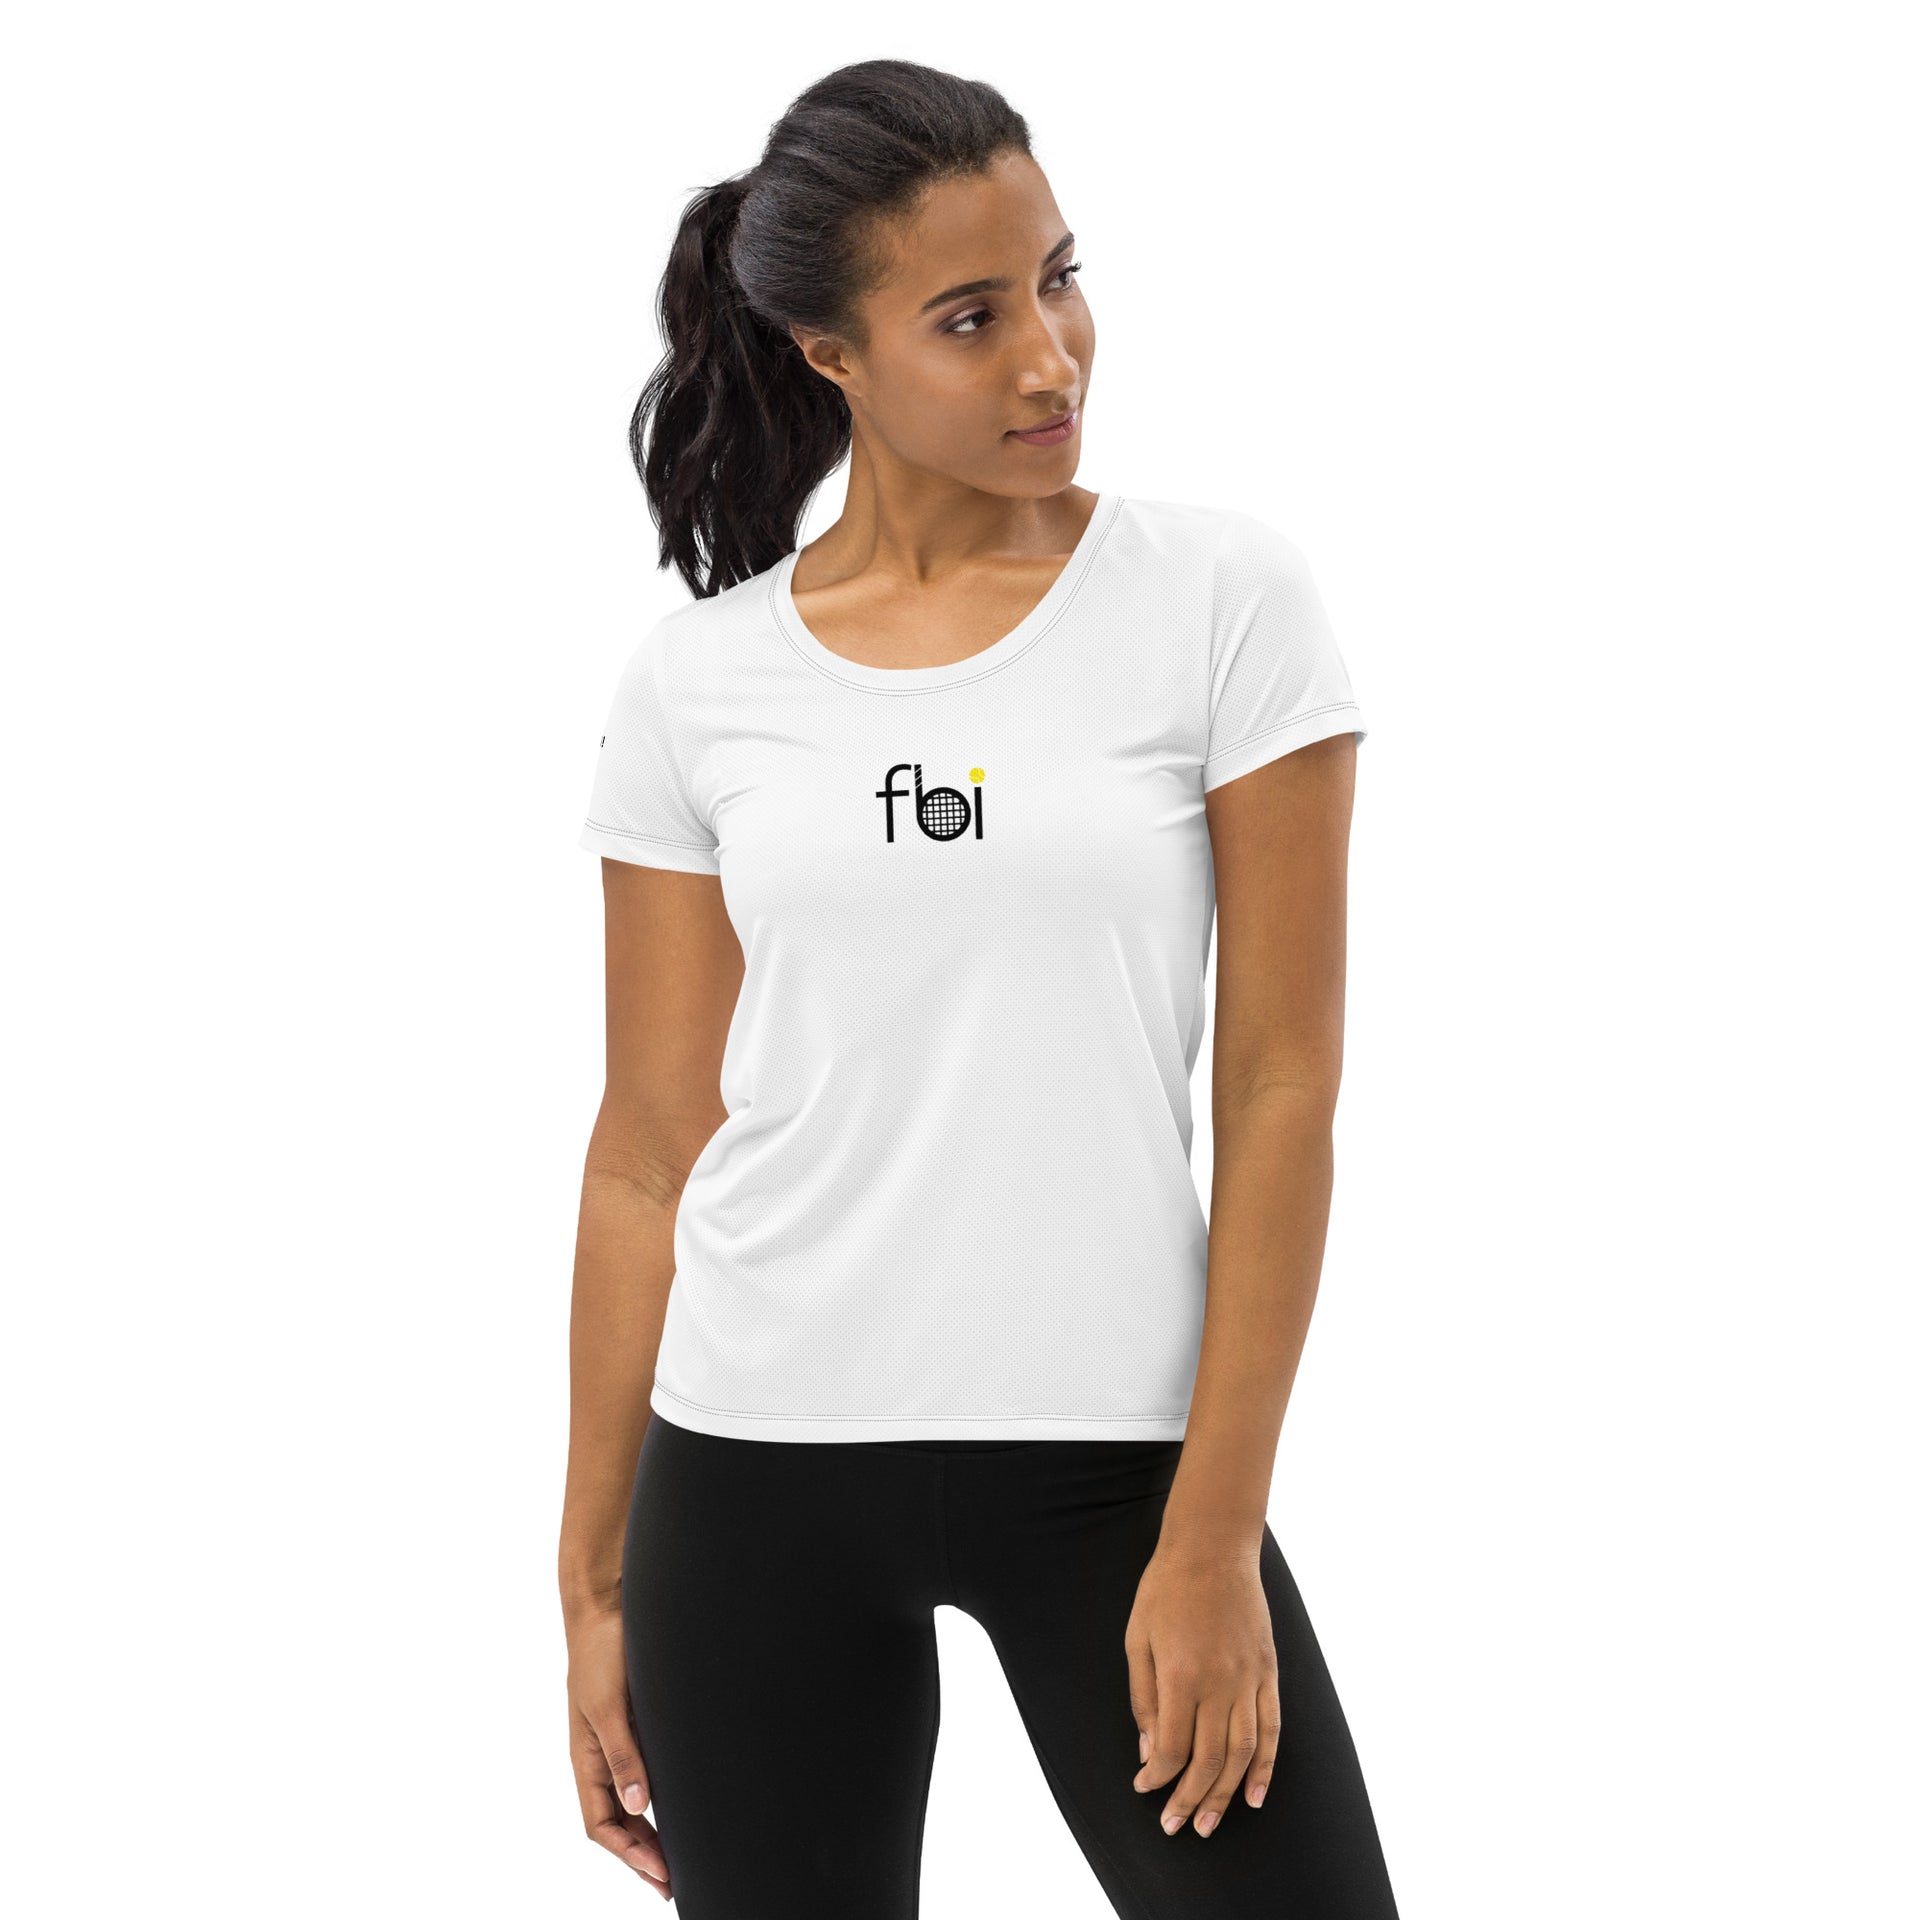 All-Over Print Women's Athletic T-shirt - Silvercomms Clothing